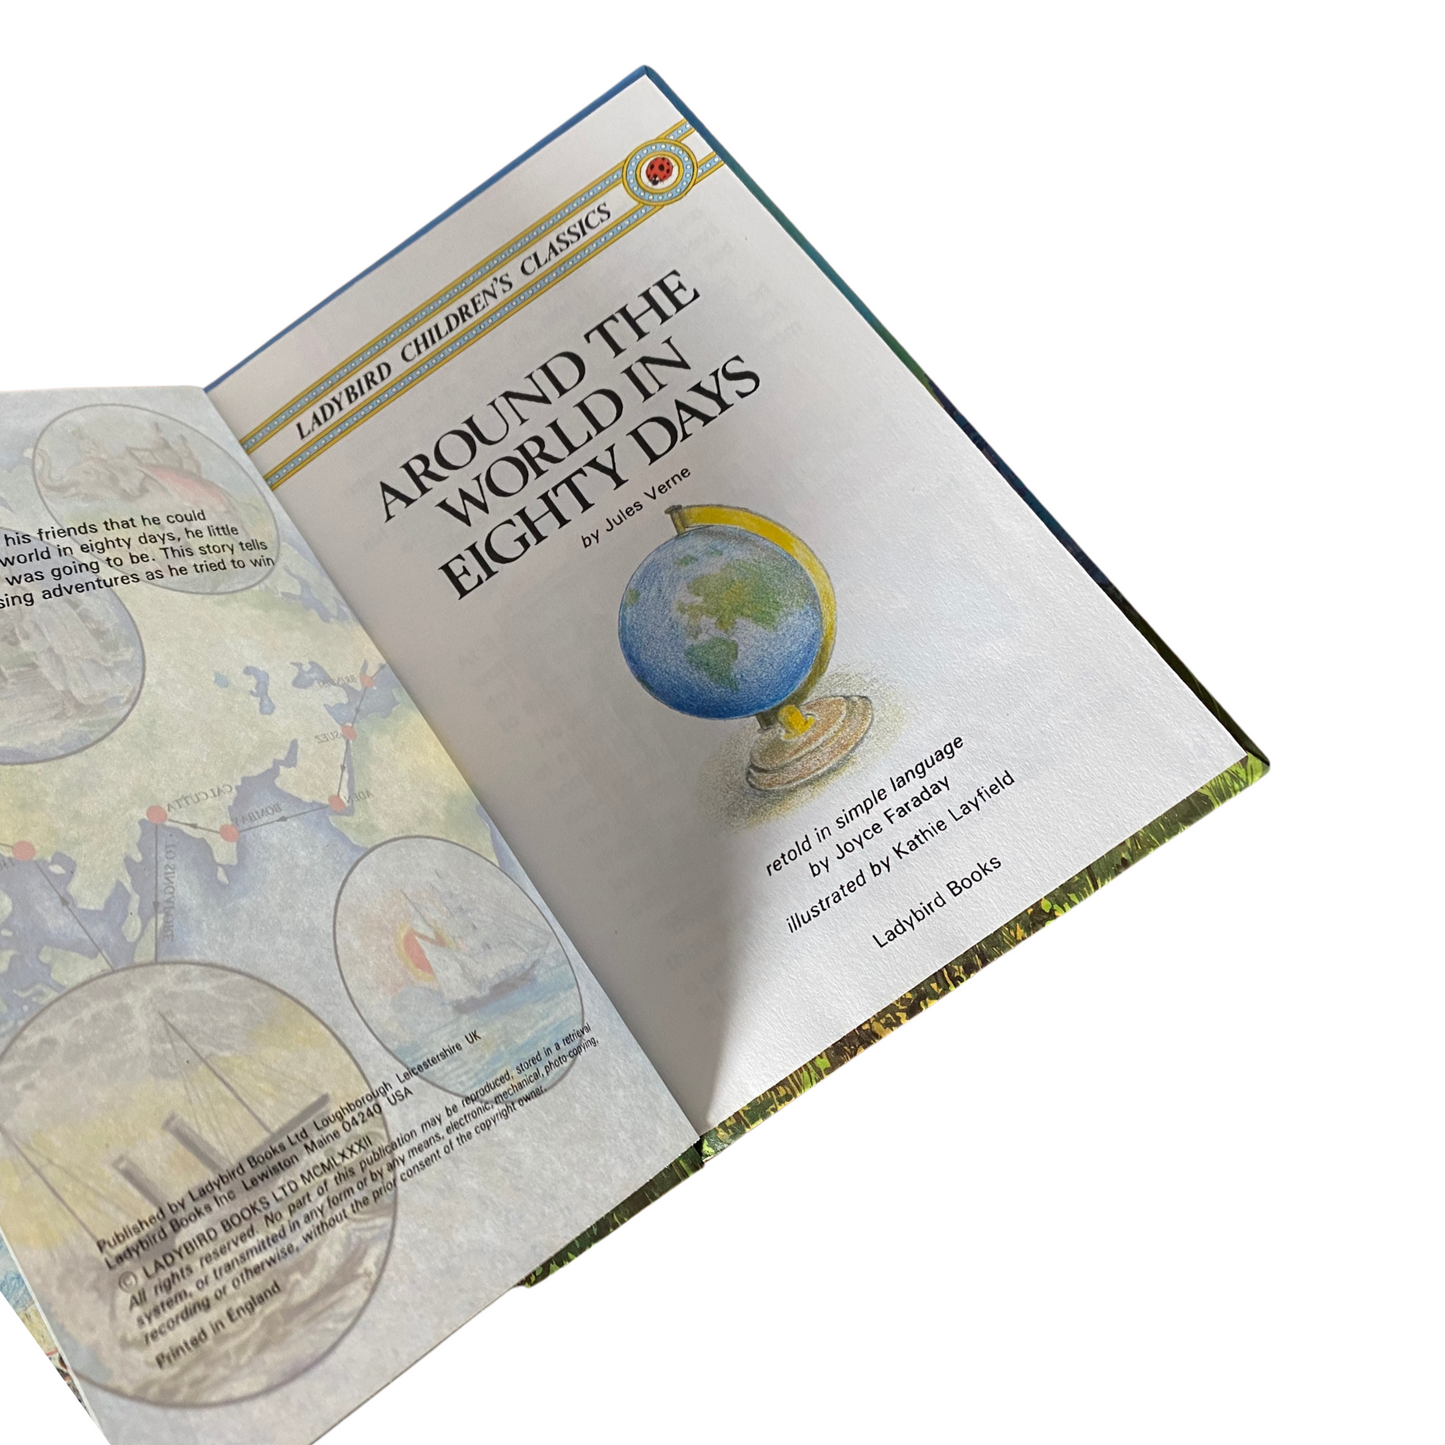 Small hardback book -   Around the World in 80 Days by Jules Verne  , perfect for collectors and nostalgic gifts